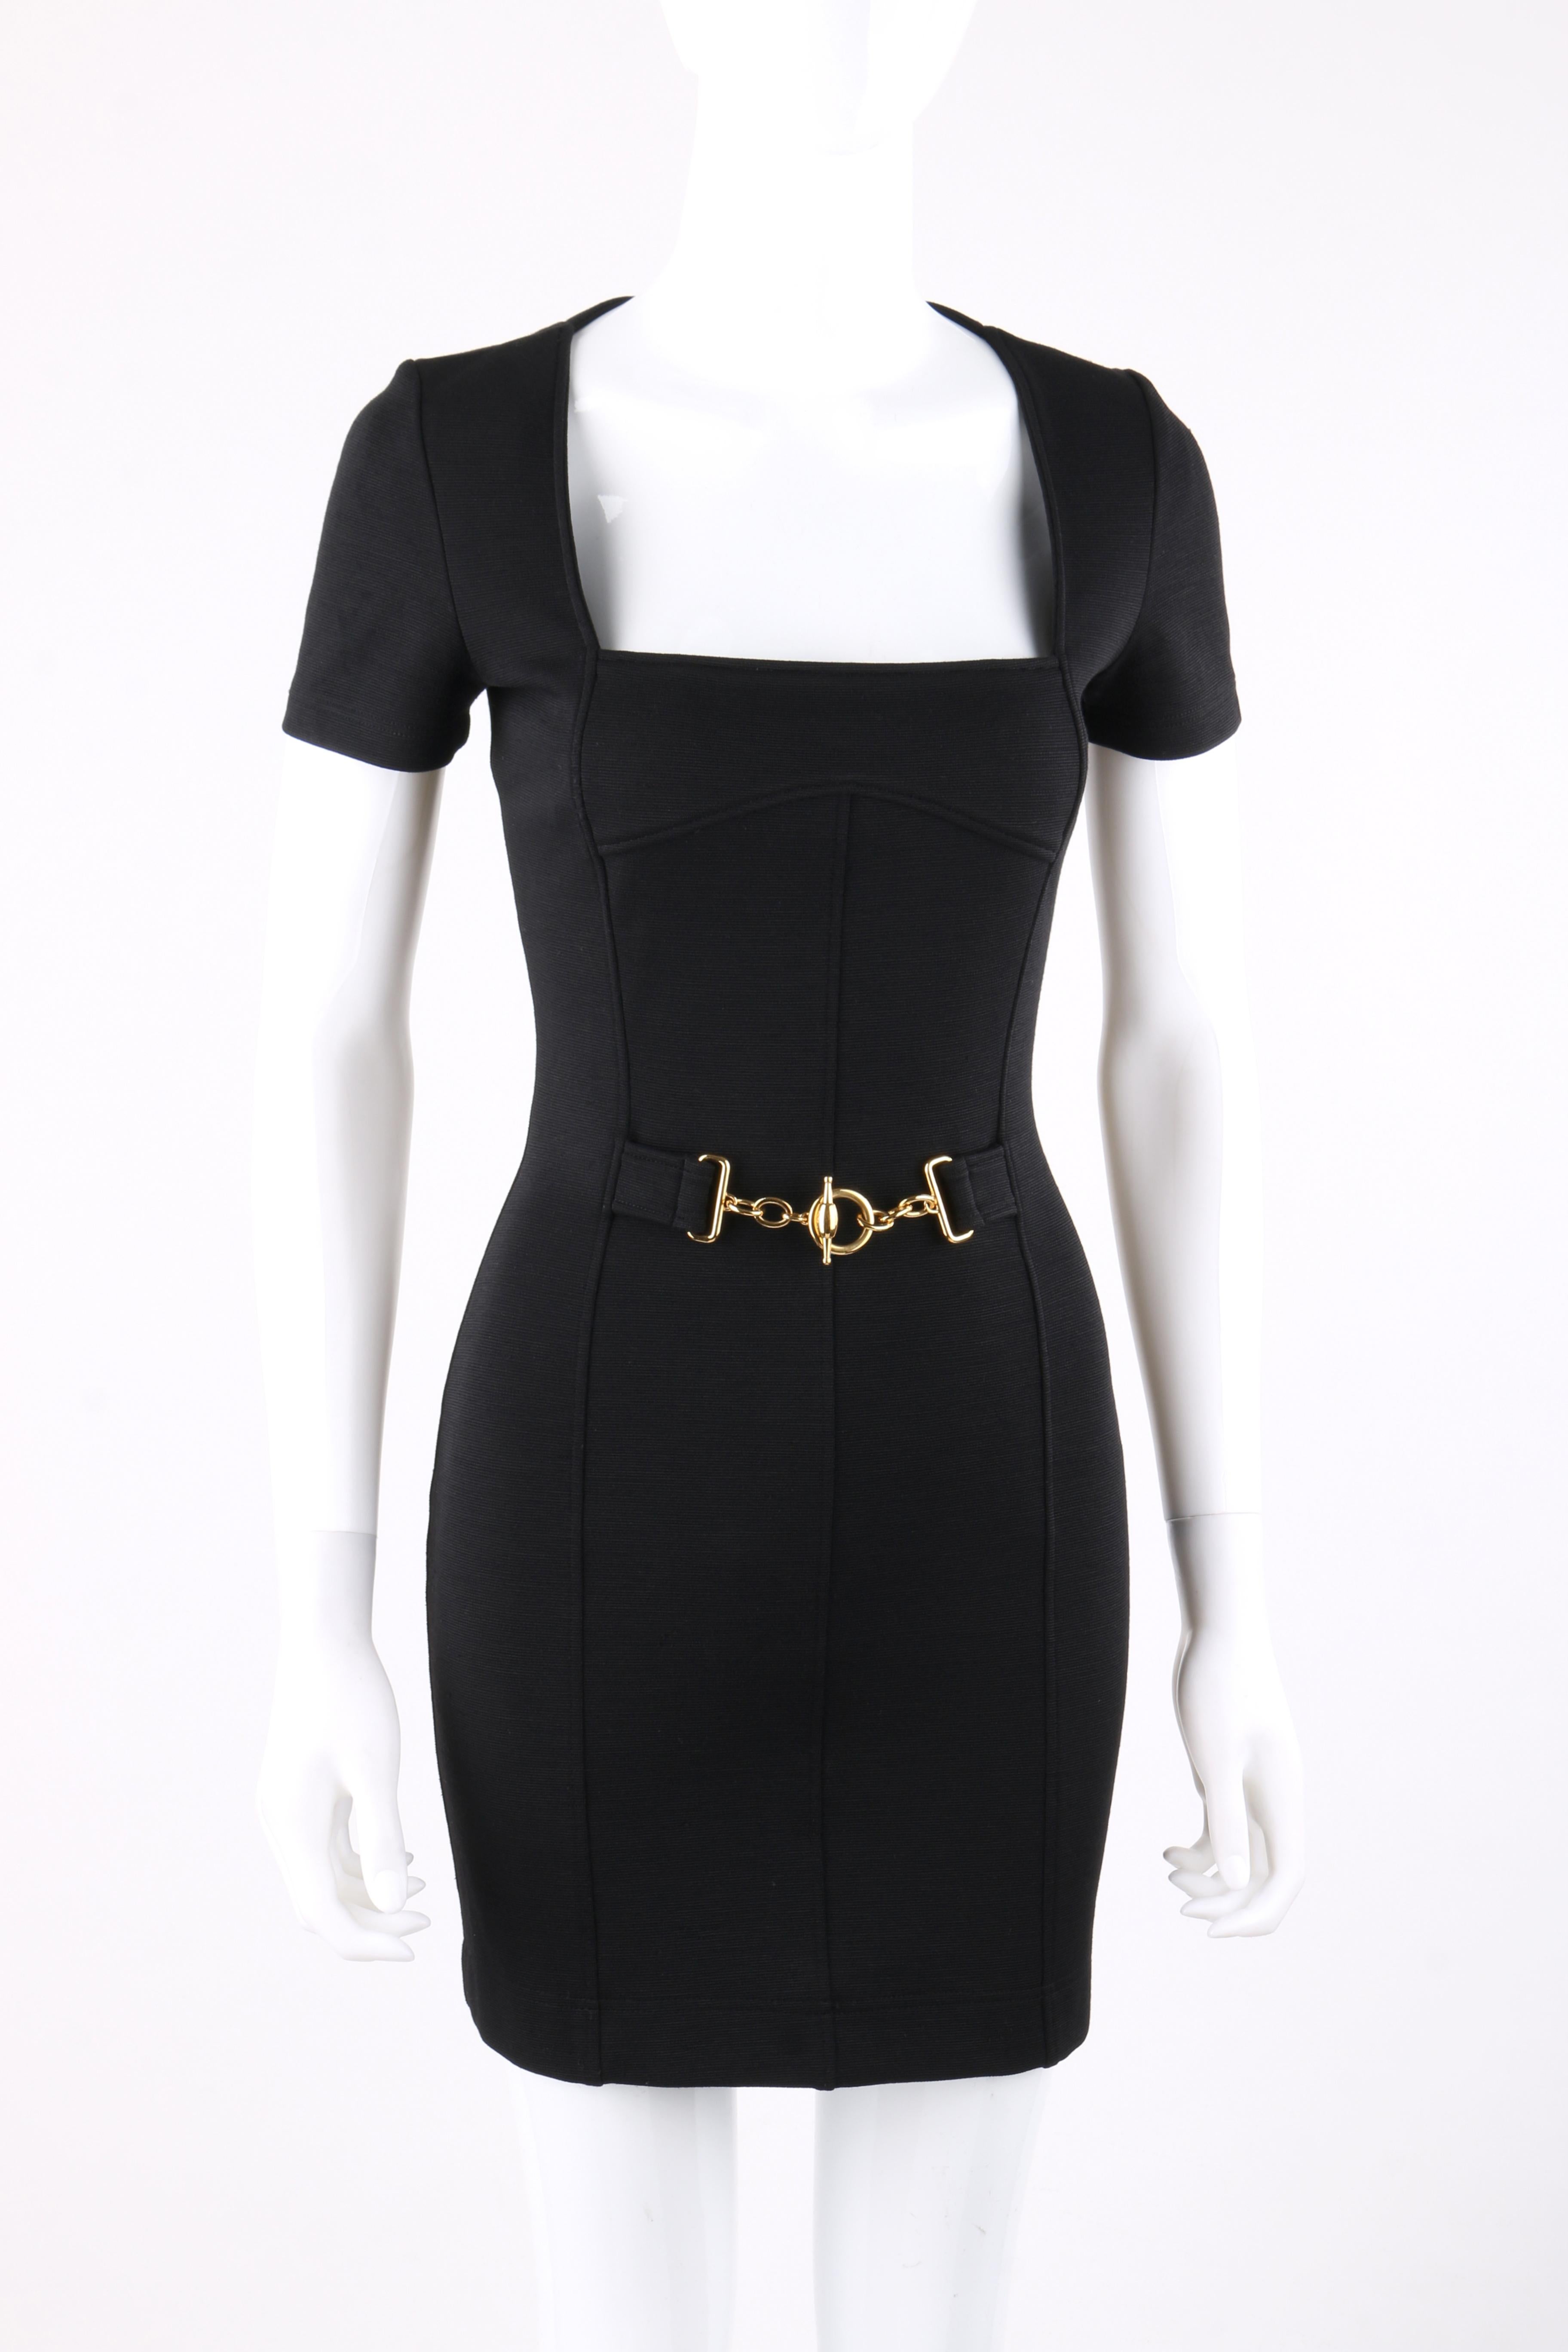 GUCCI 2000's Tom Ford Black Square Neck Gold Waist Belt Mini Cocktail Dress
 
Circa: 2000's
Brand / Manufacturer: Gucci
Designer: Tom Ford
Style: Sheath dress
Color(s): Black; gold (belt detail)
Lined: No
Unmarked Fabric Content: Wool blend knit